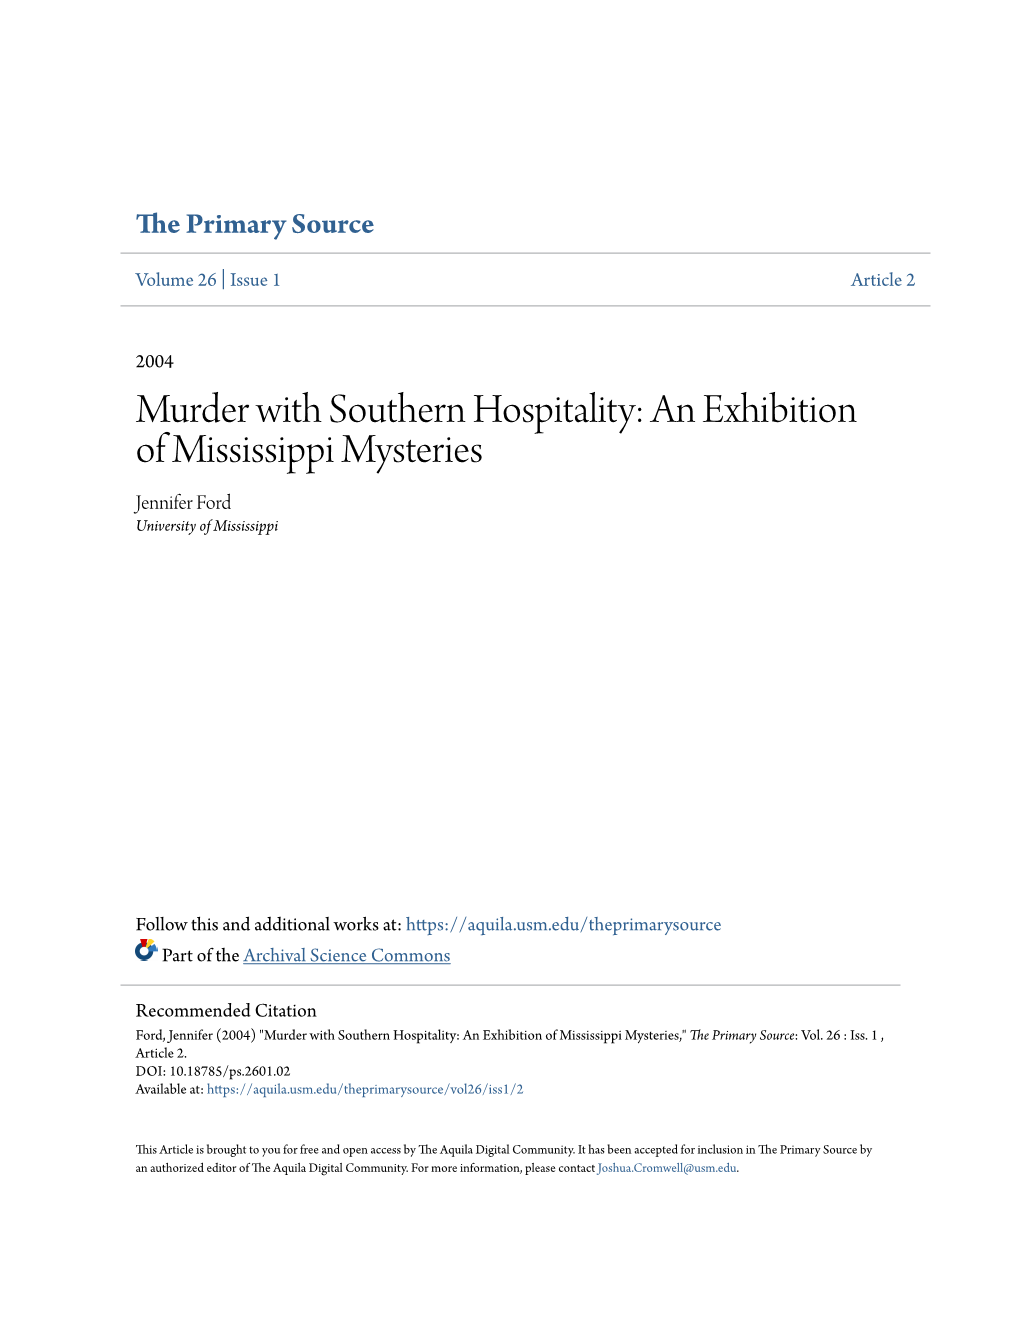 Murder with Southern Hospitality: an Exhibition of Mississippi Mysteries Jennifer Ford University of Mississippi